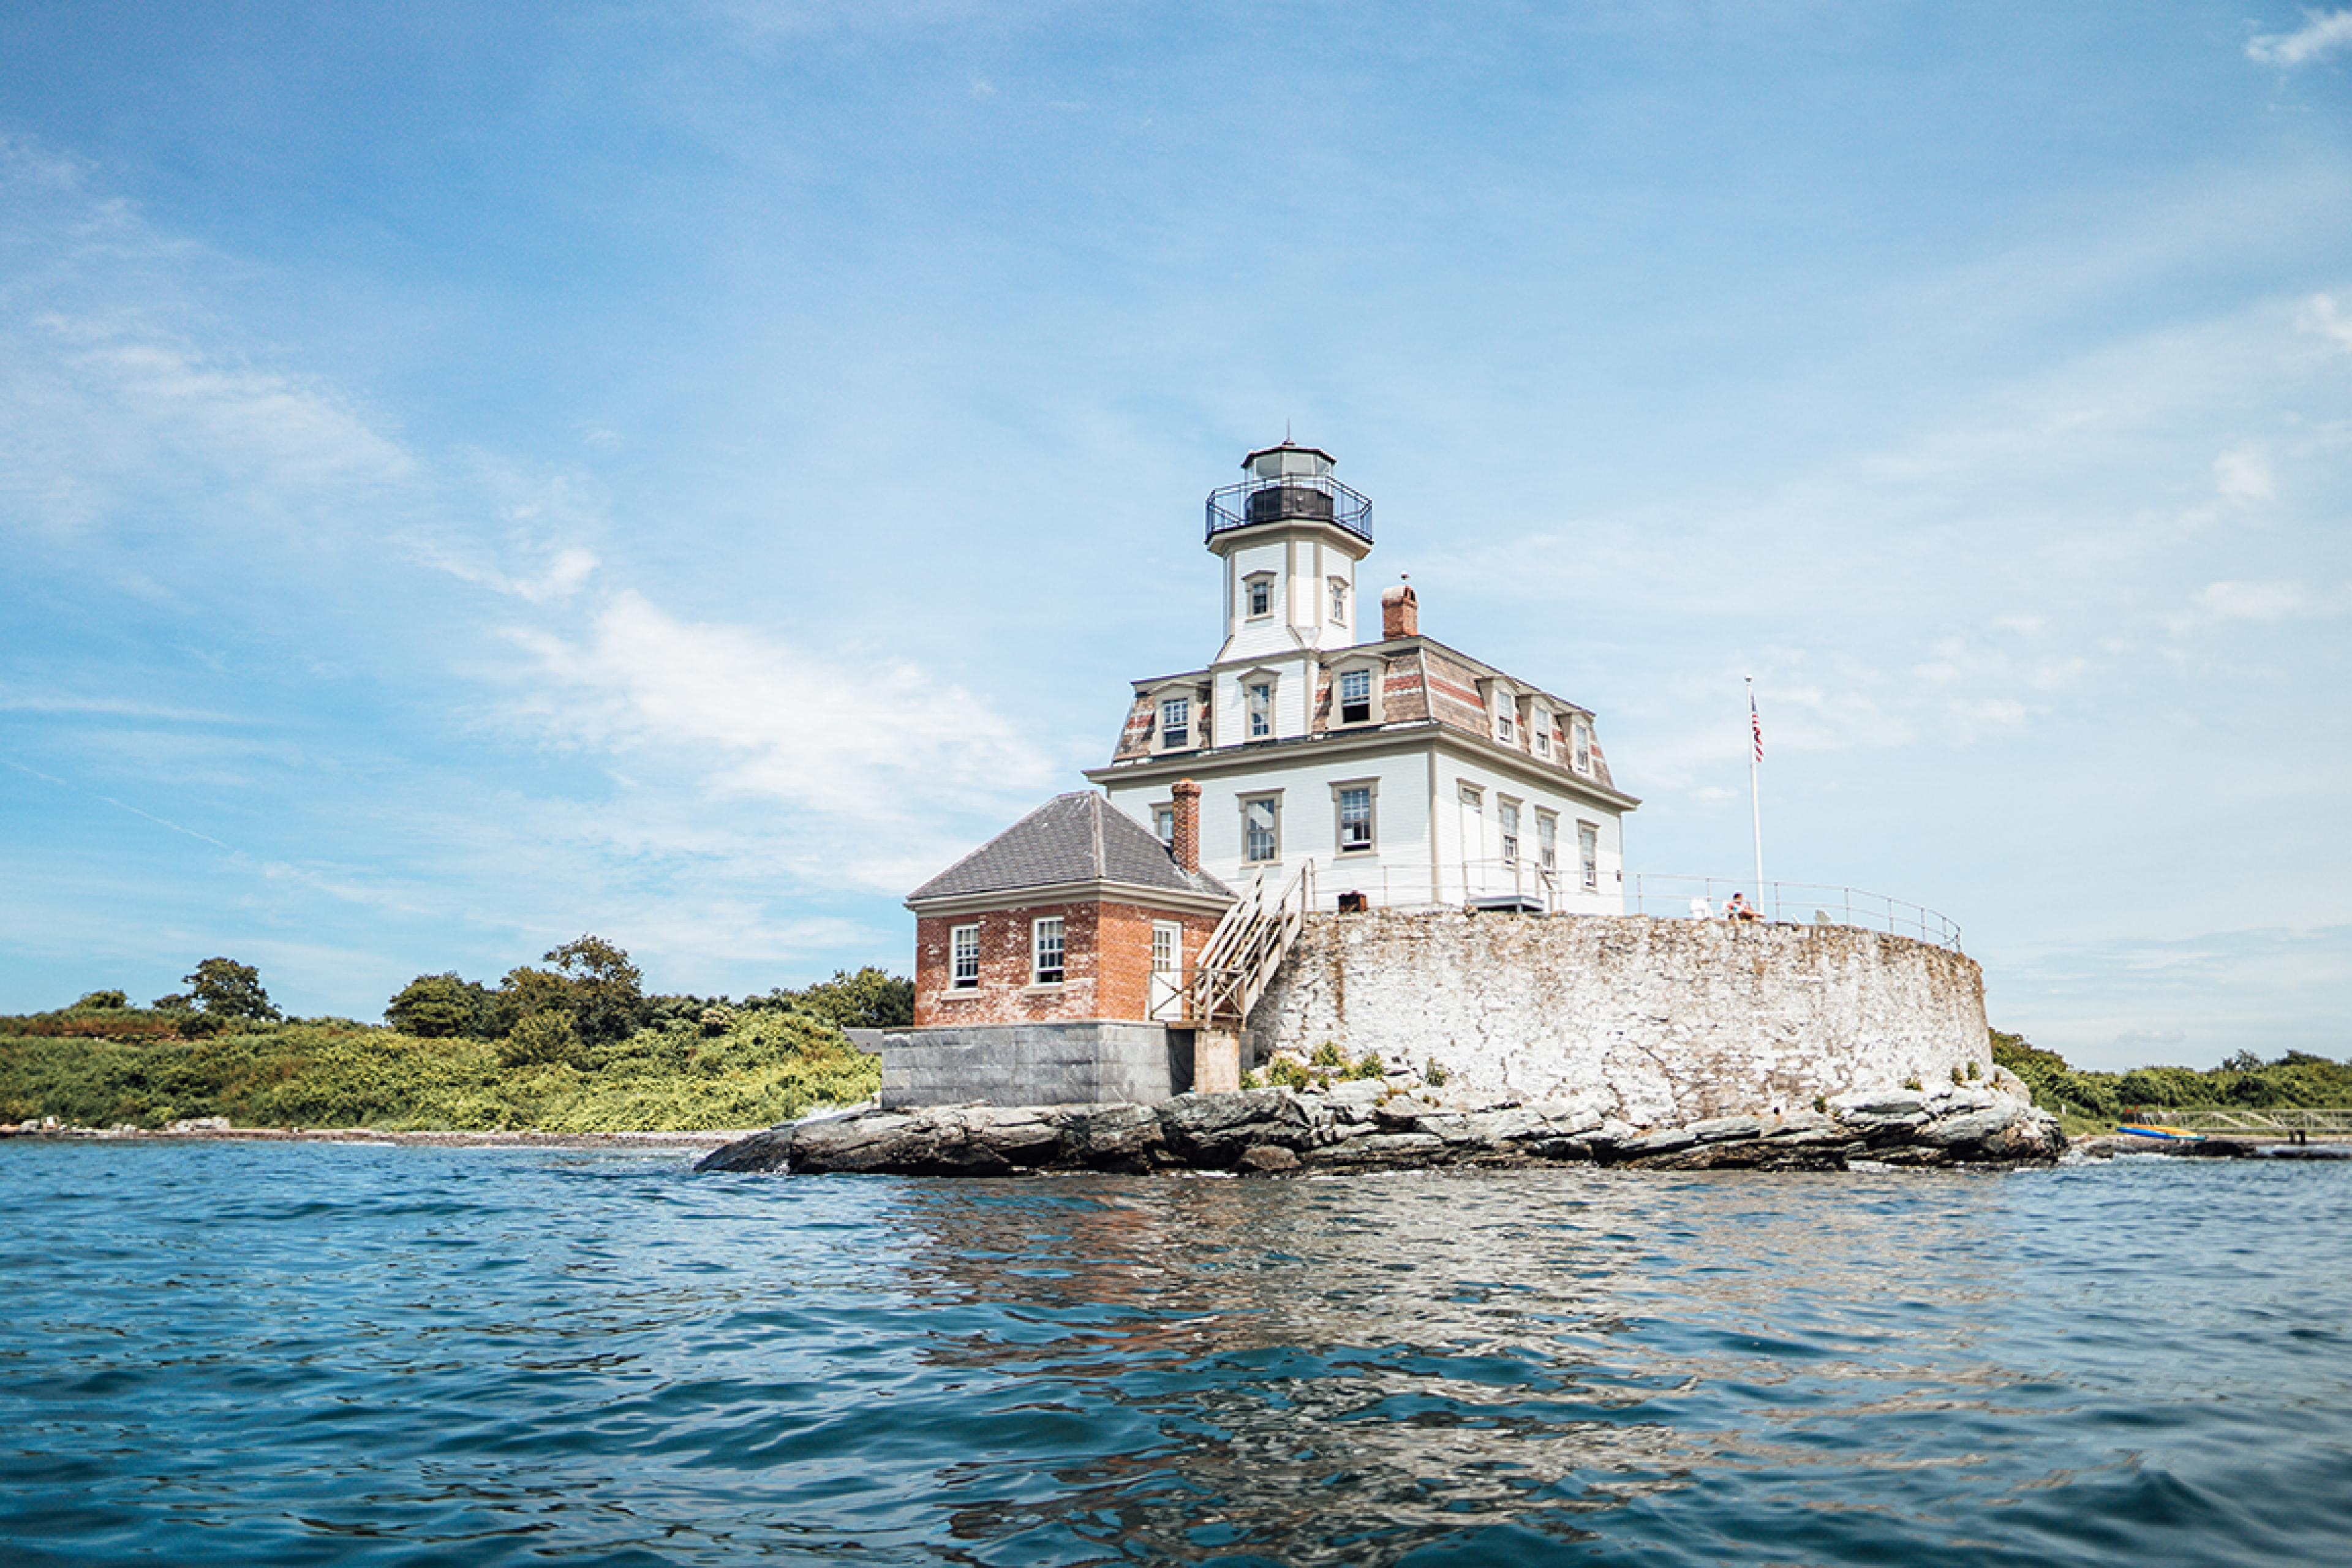 Lighthouse on rocks in a harbor in Newport